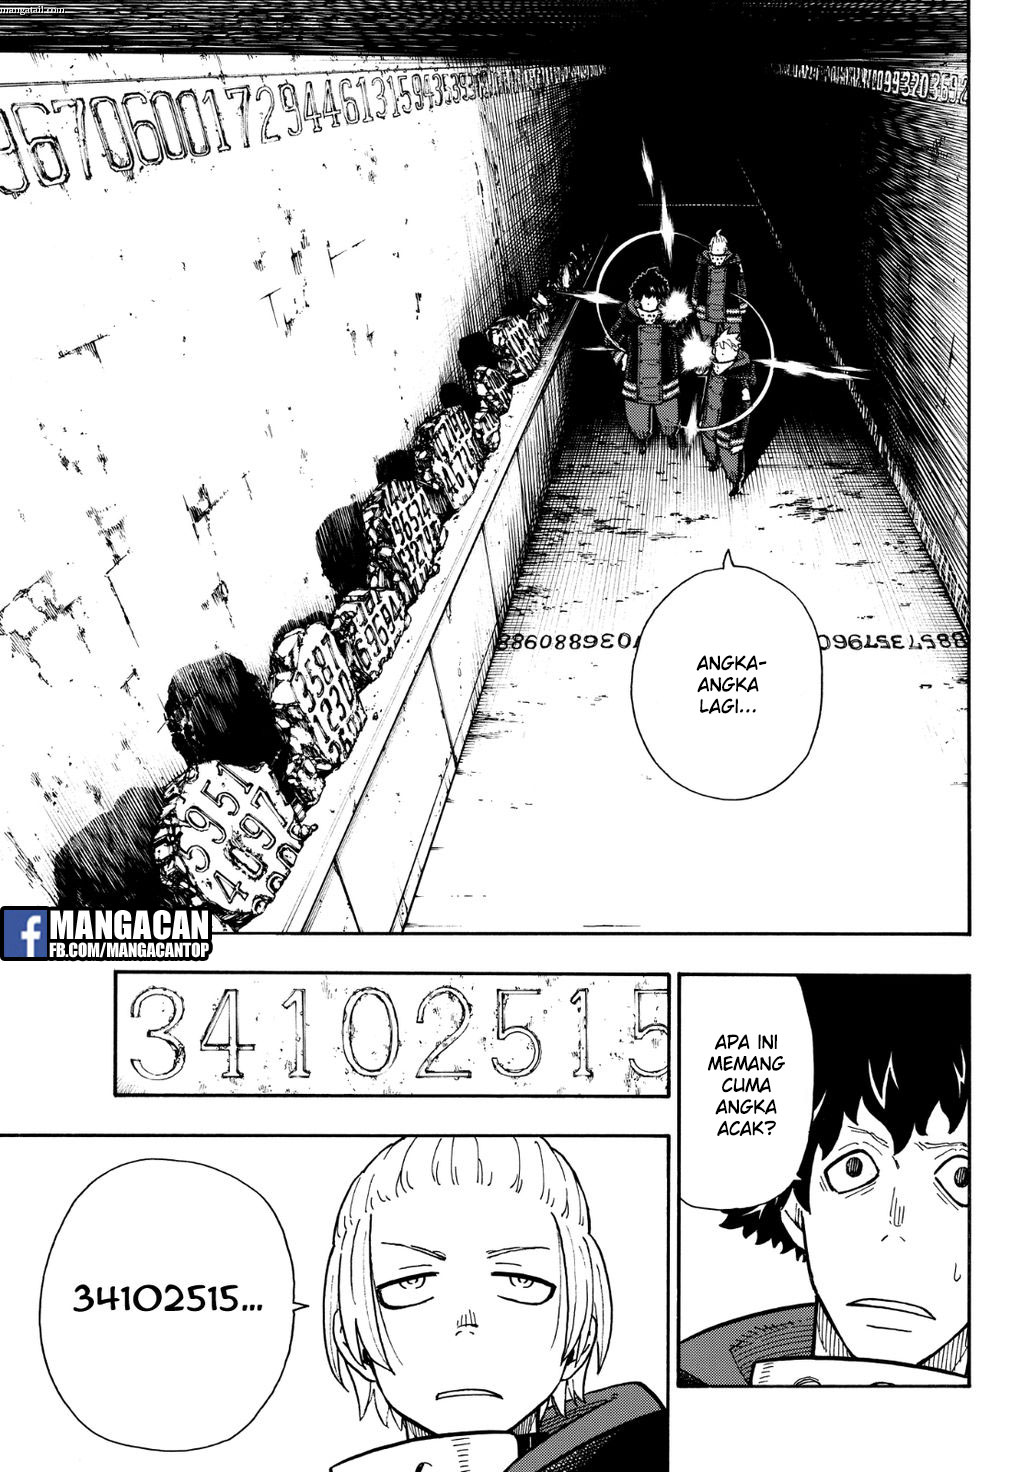 Fire Brigade of Flames Chapter 118